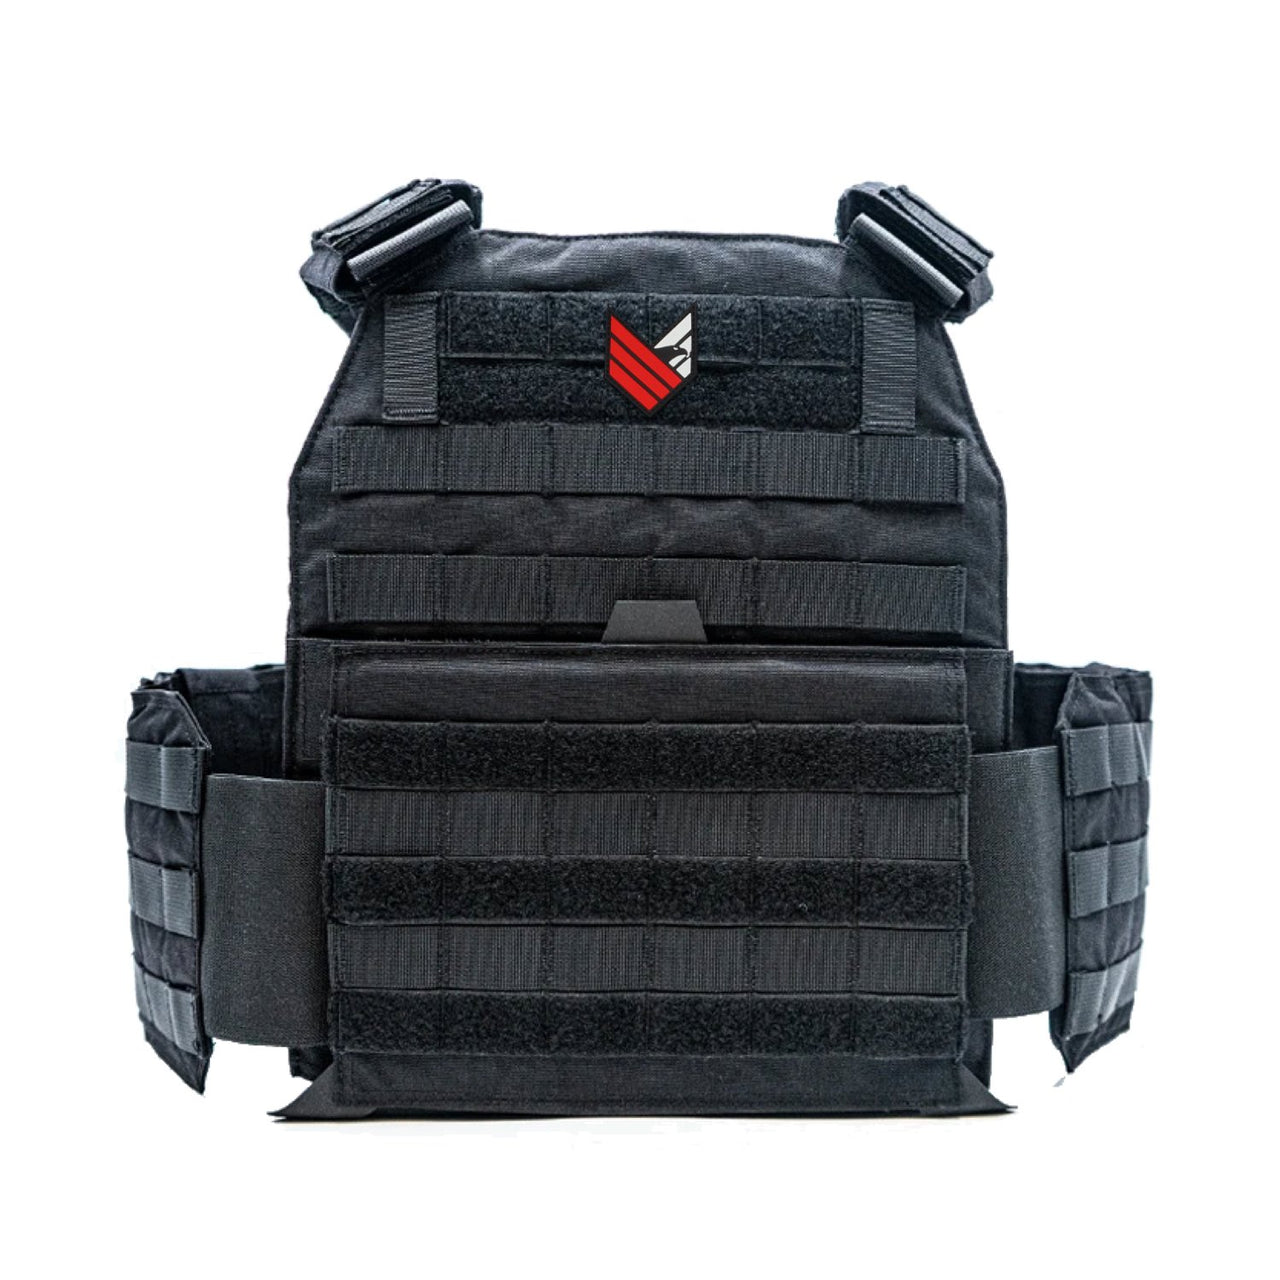 A black Body Armor Direct Advanced Body Armor Plate Carrier with Cummerbund on a white background.